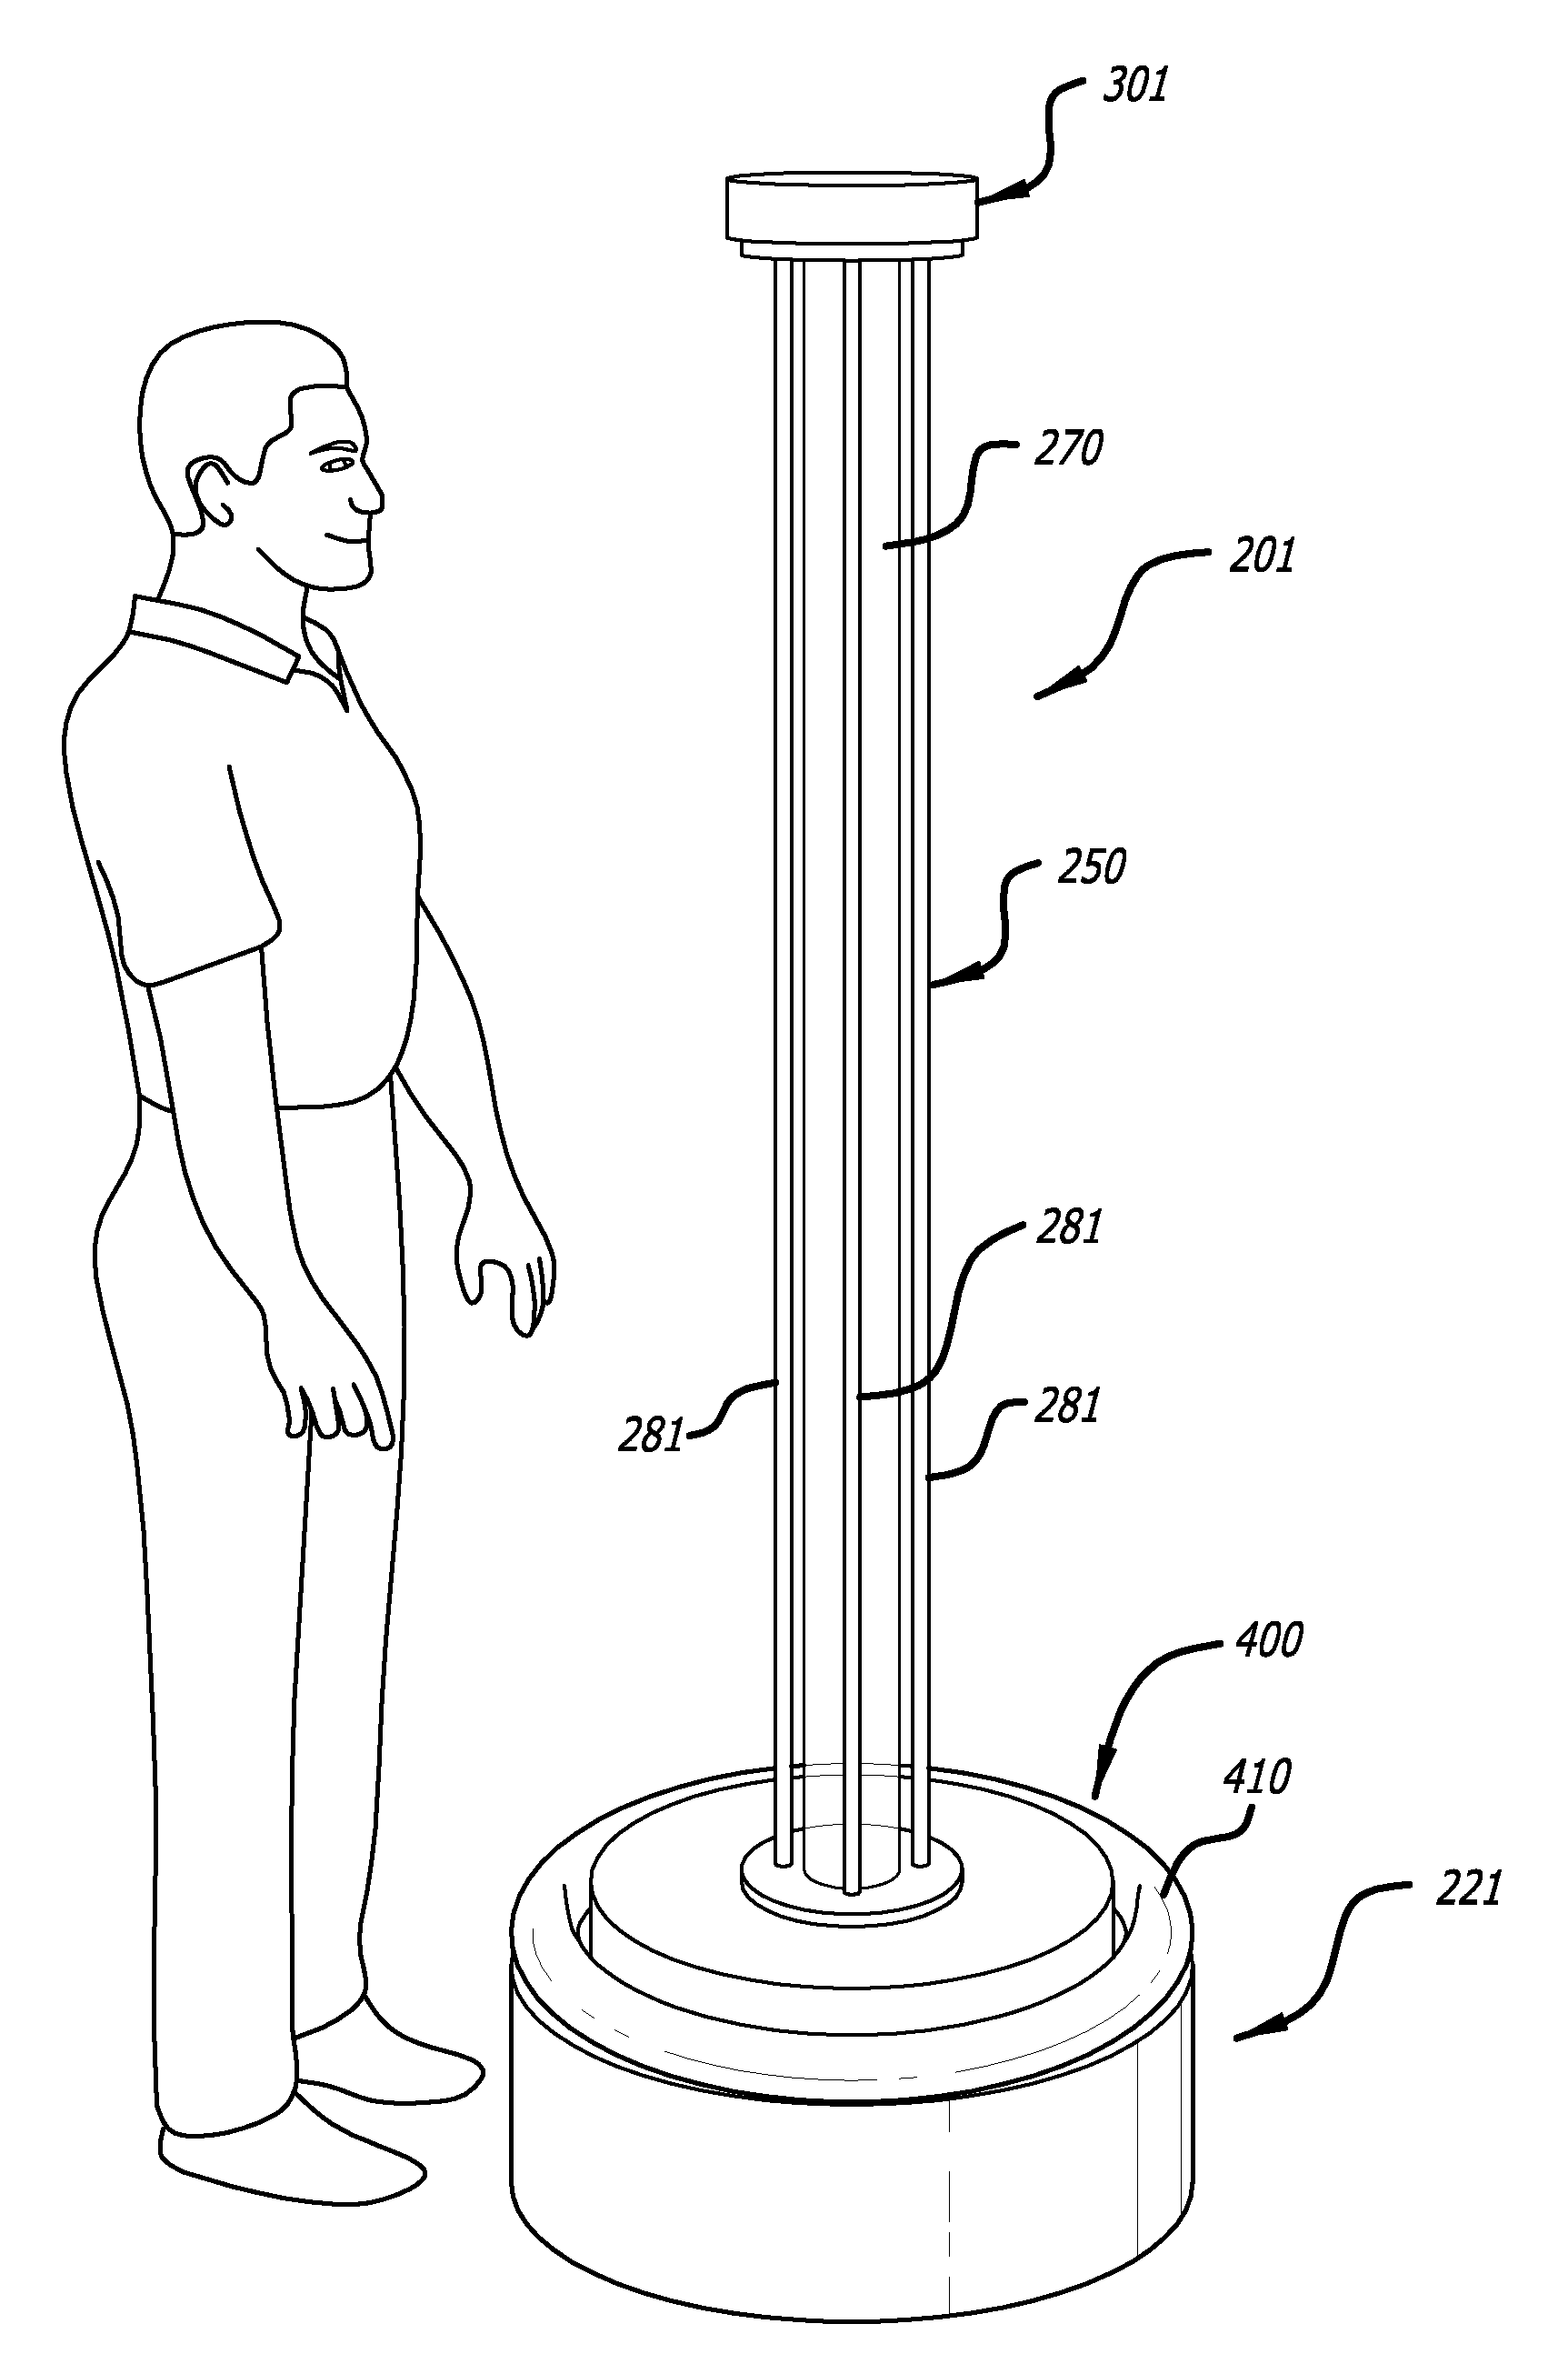 Hard-Surface Disinfection System